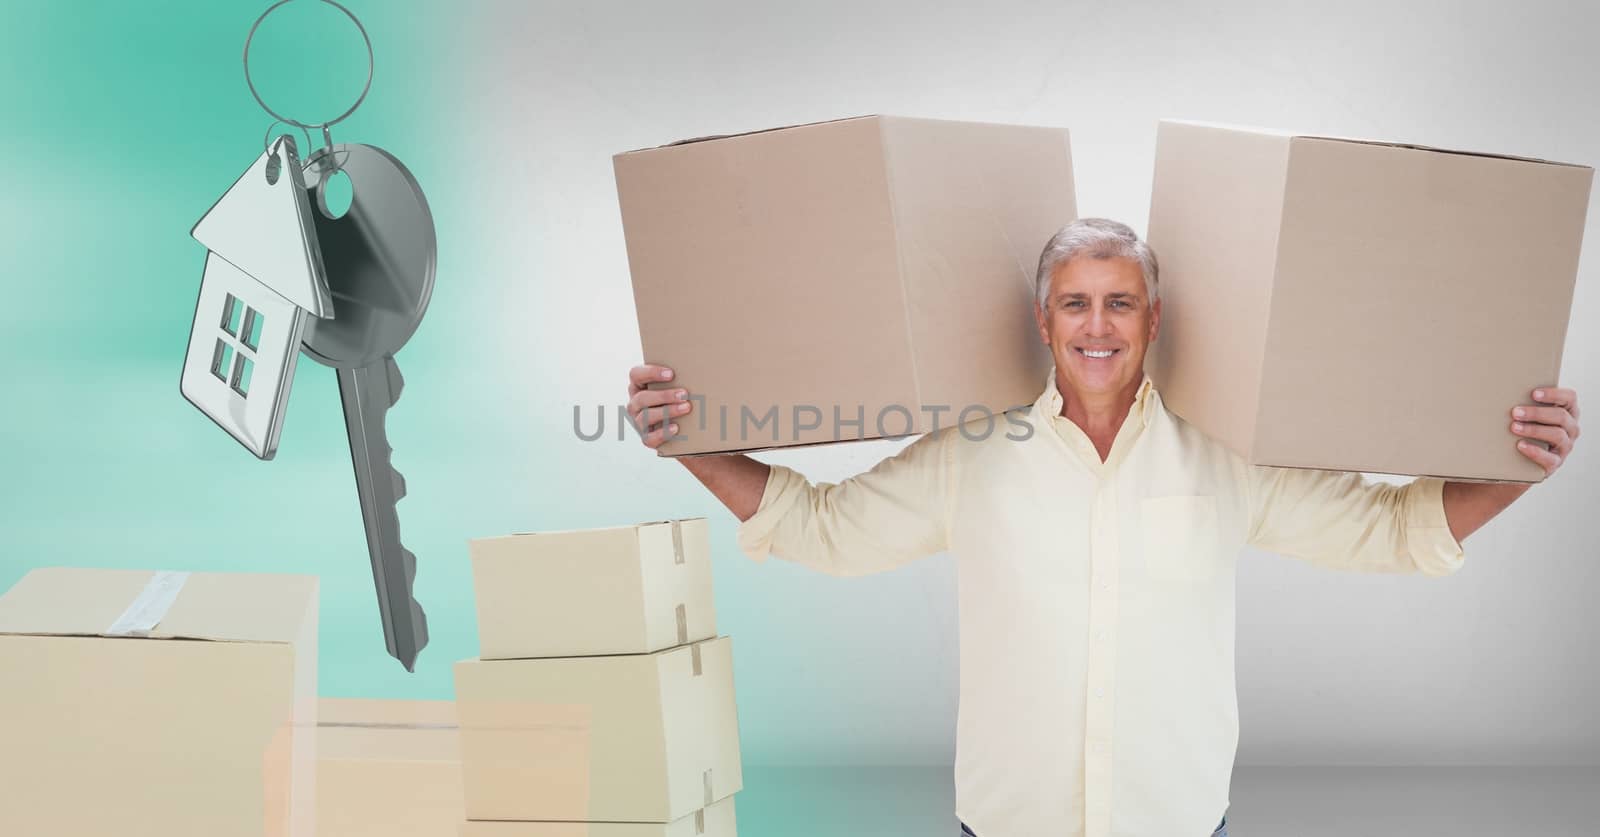 Digital composite of people moving boxes into new home with key